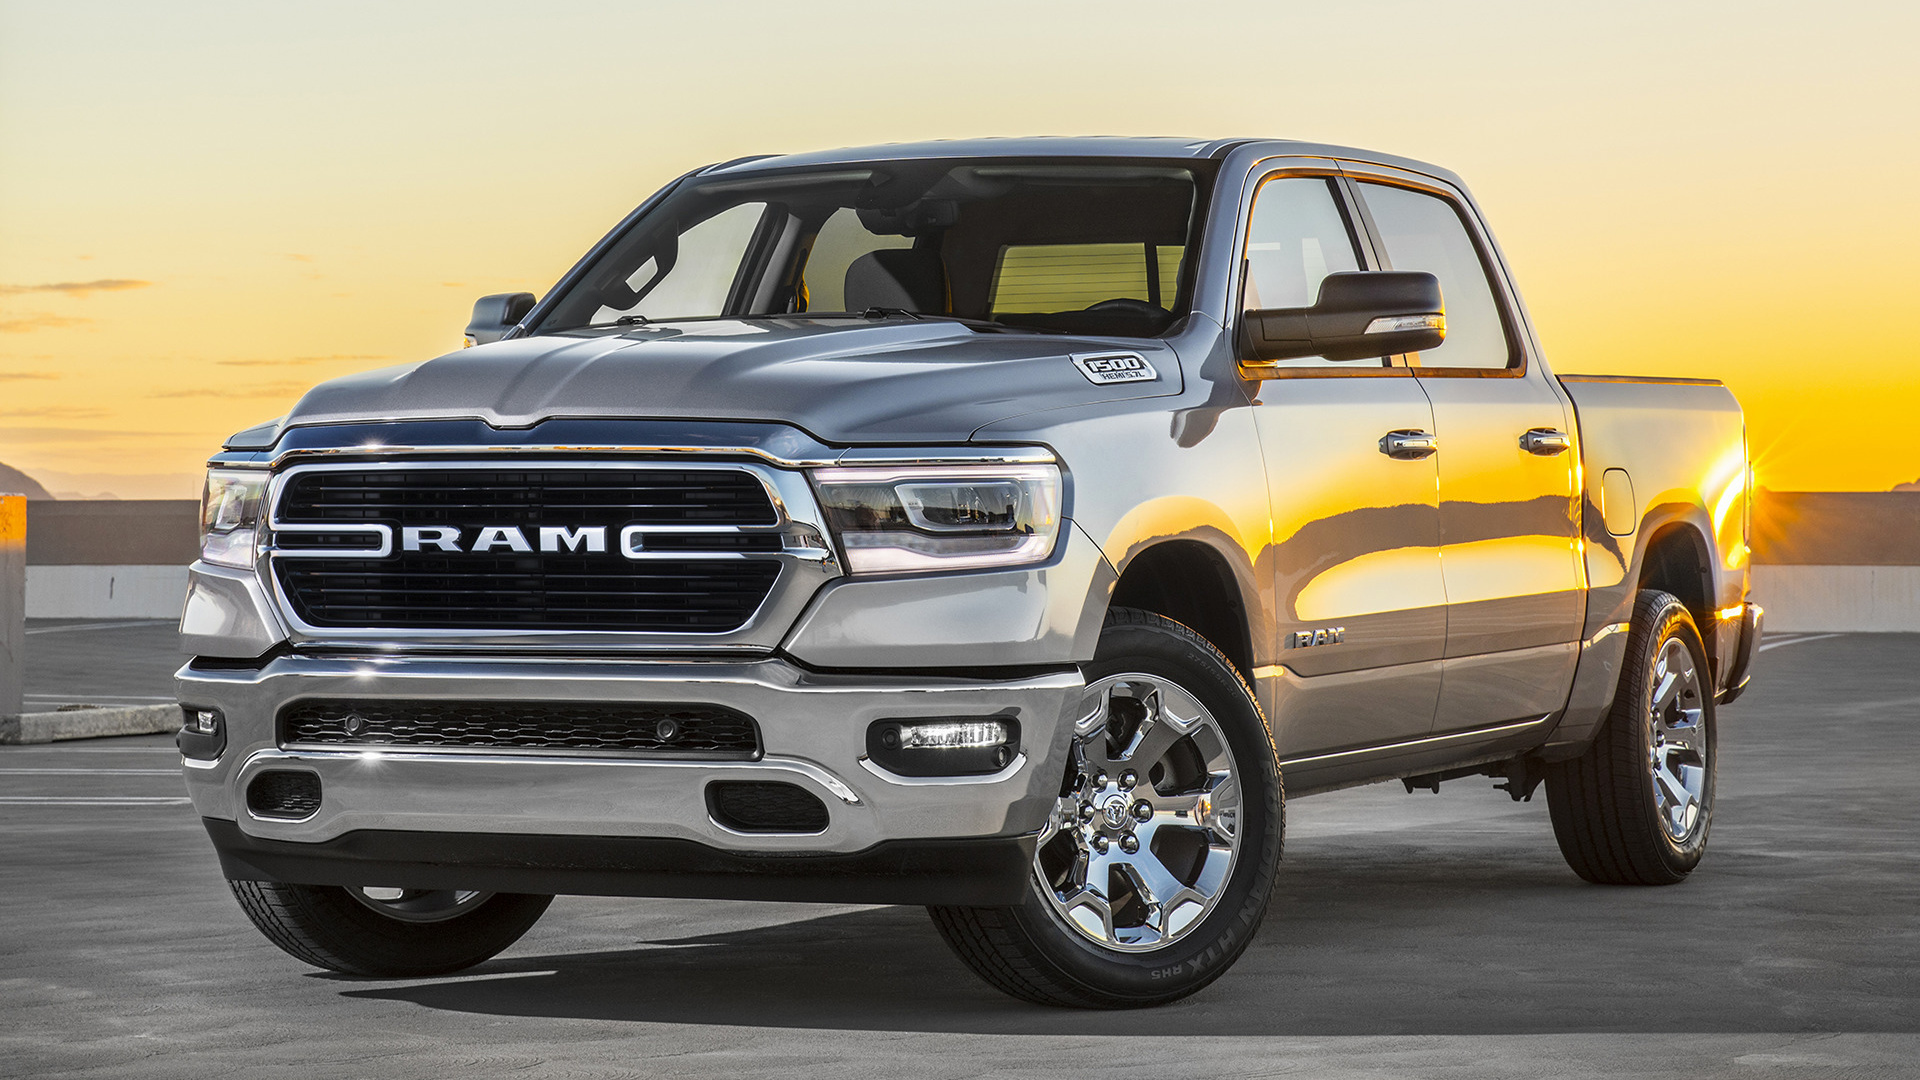 Ram 1500, Big Horn edition, High-definition wallpapers, Strong and stylish, 1920x1080 Full HD Desktop